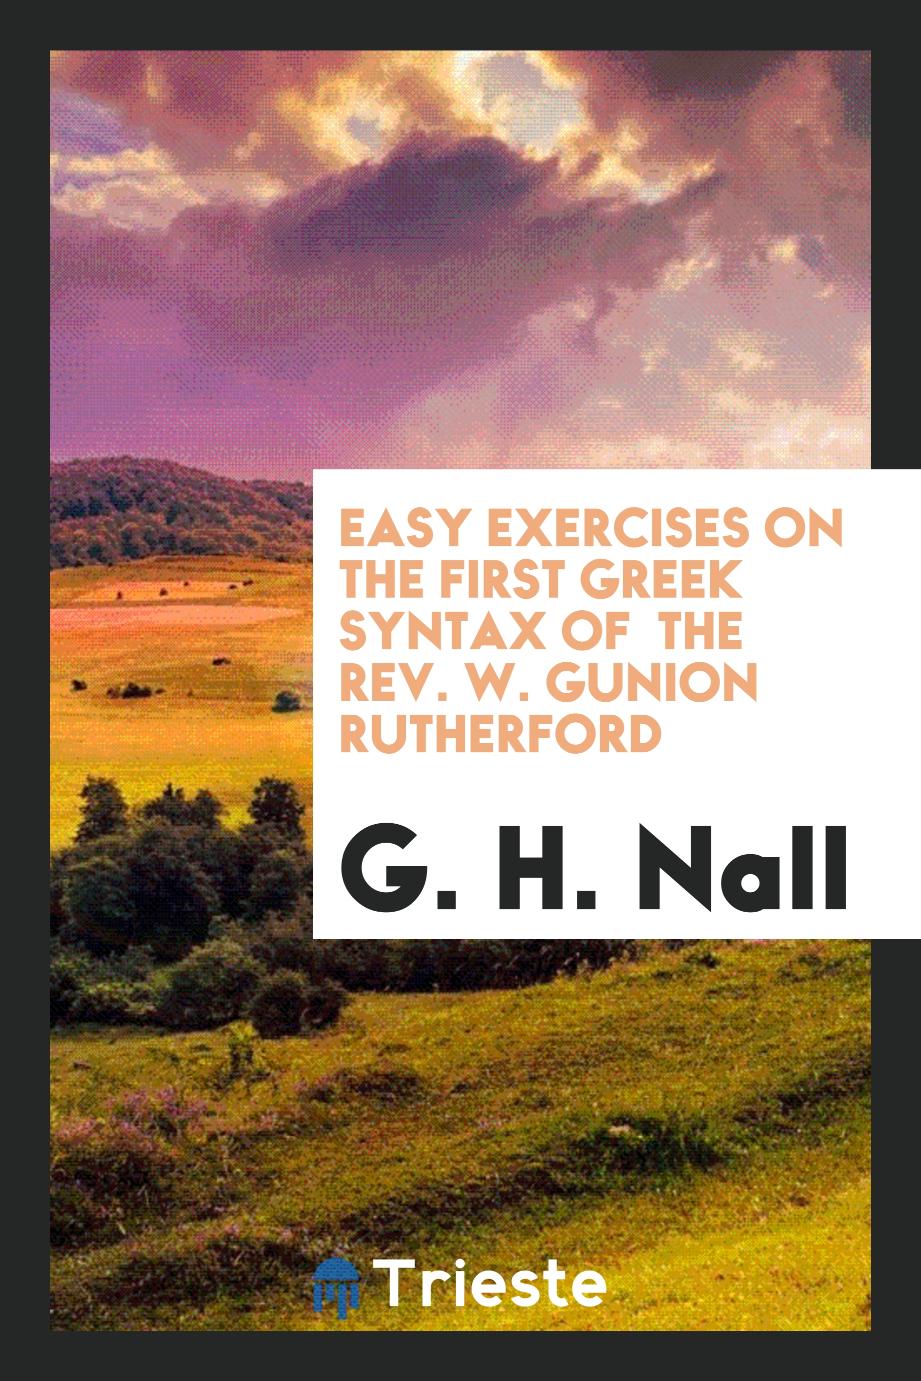 Easy exercises on the First Greek syntax of the Rev. W. Gunion Rutherford